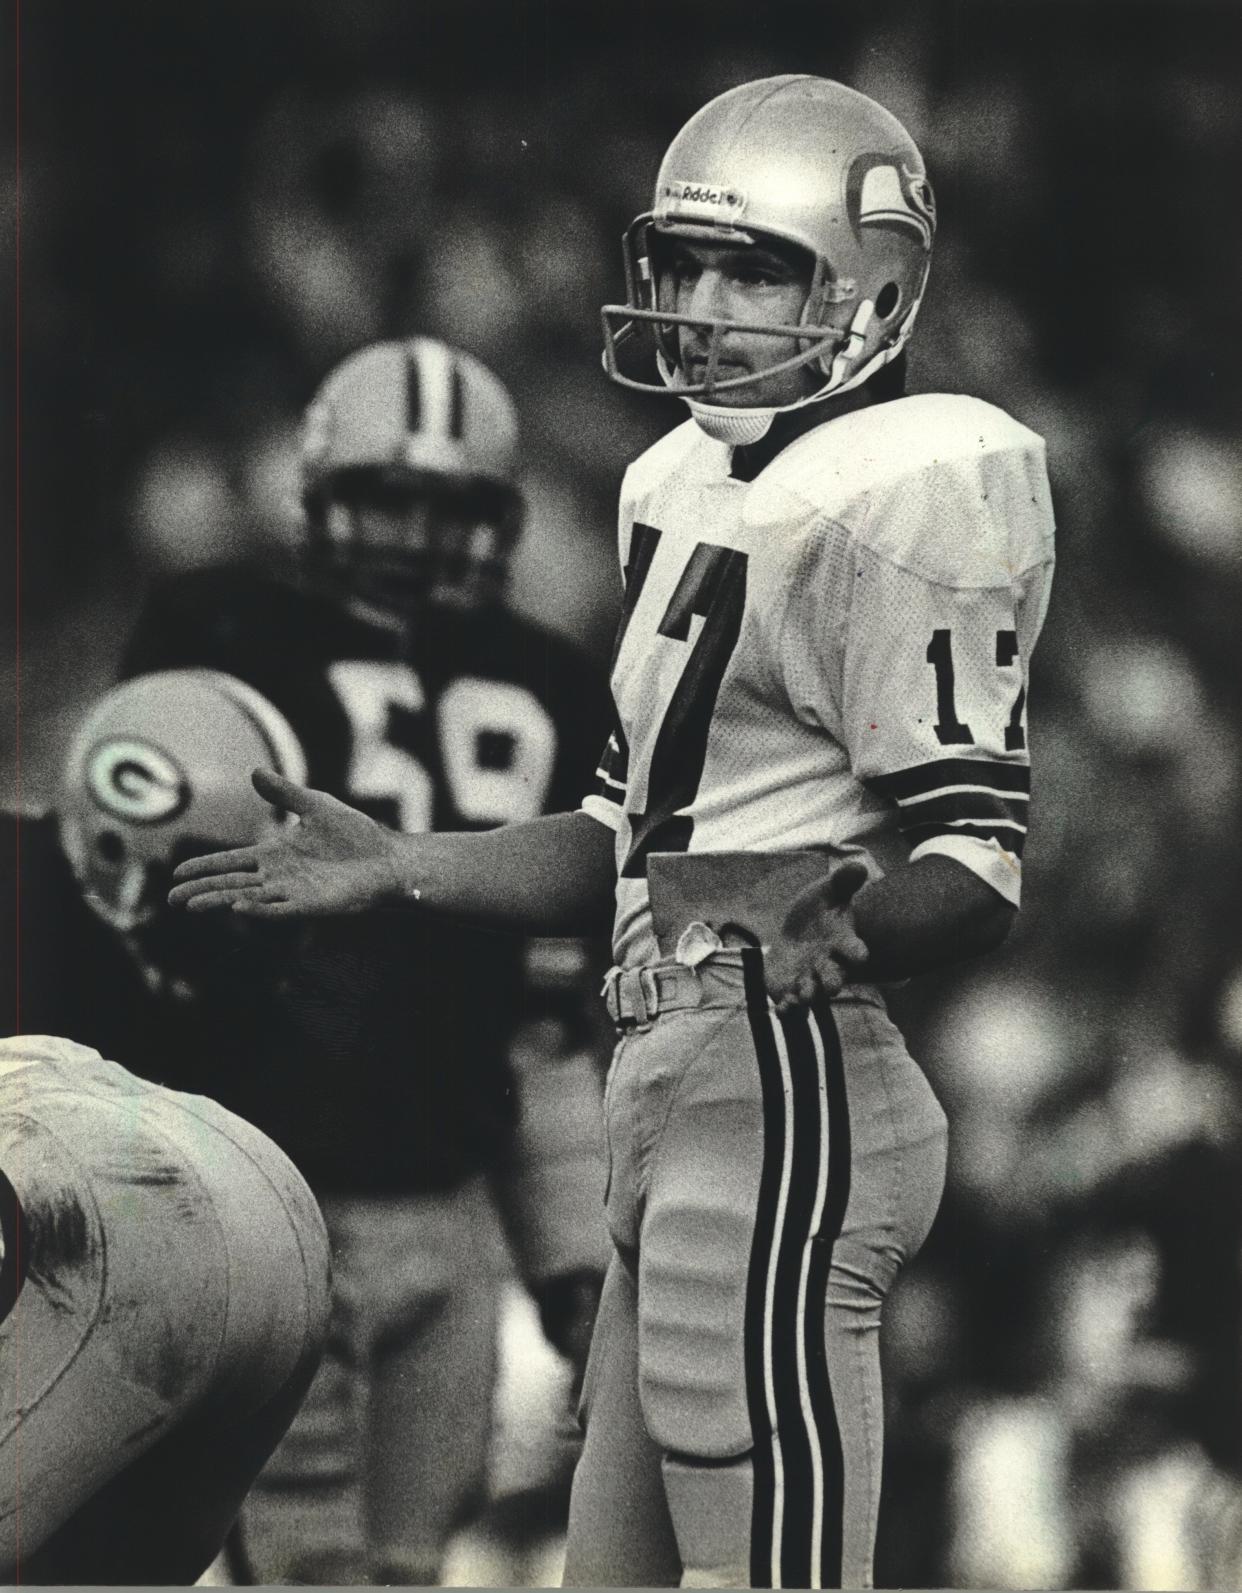 Dave Krieg, a native of Schofield, Wisconsin, made three Pro Bowls in his NFL career.